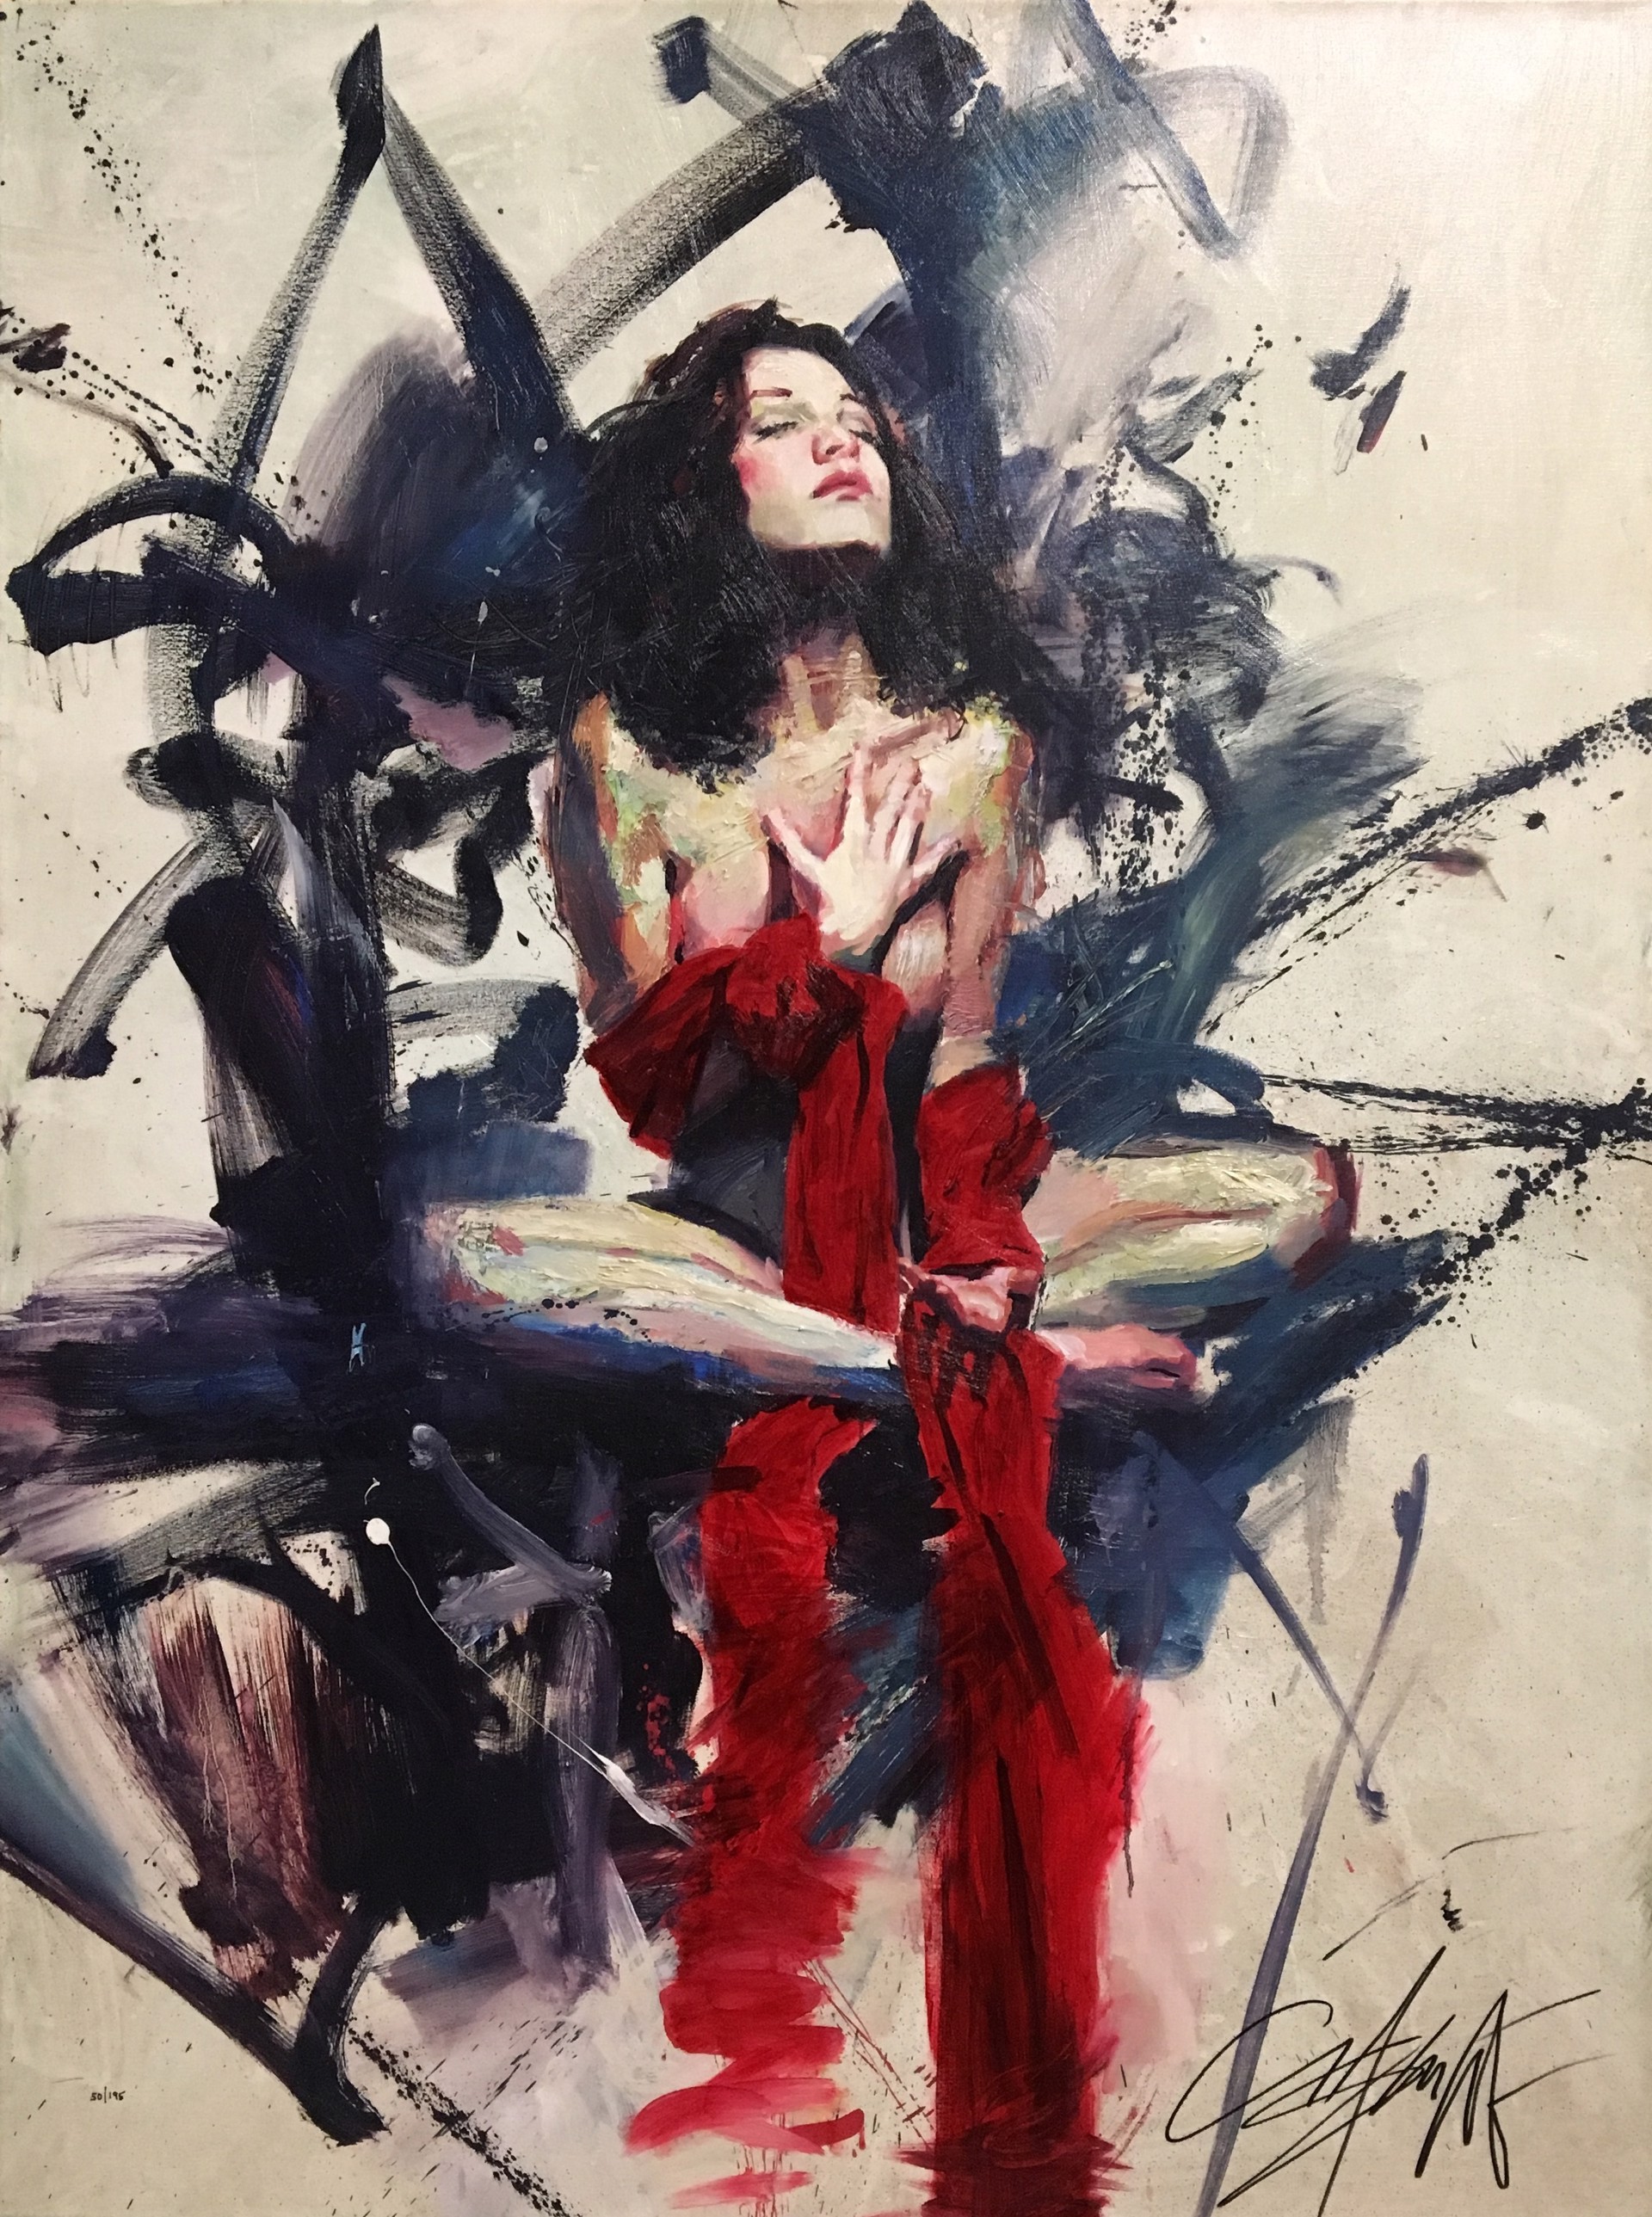 Reflecting Recognition by Henry Asencio